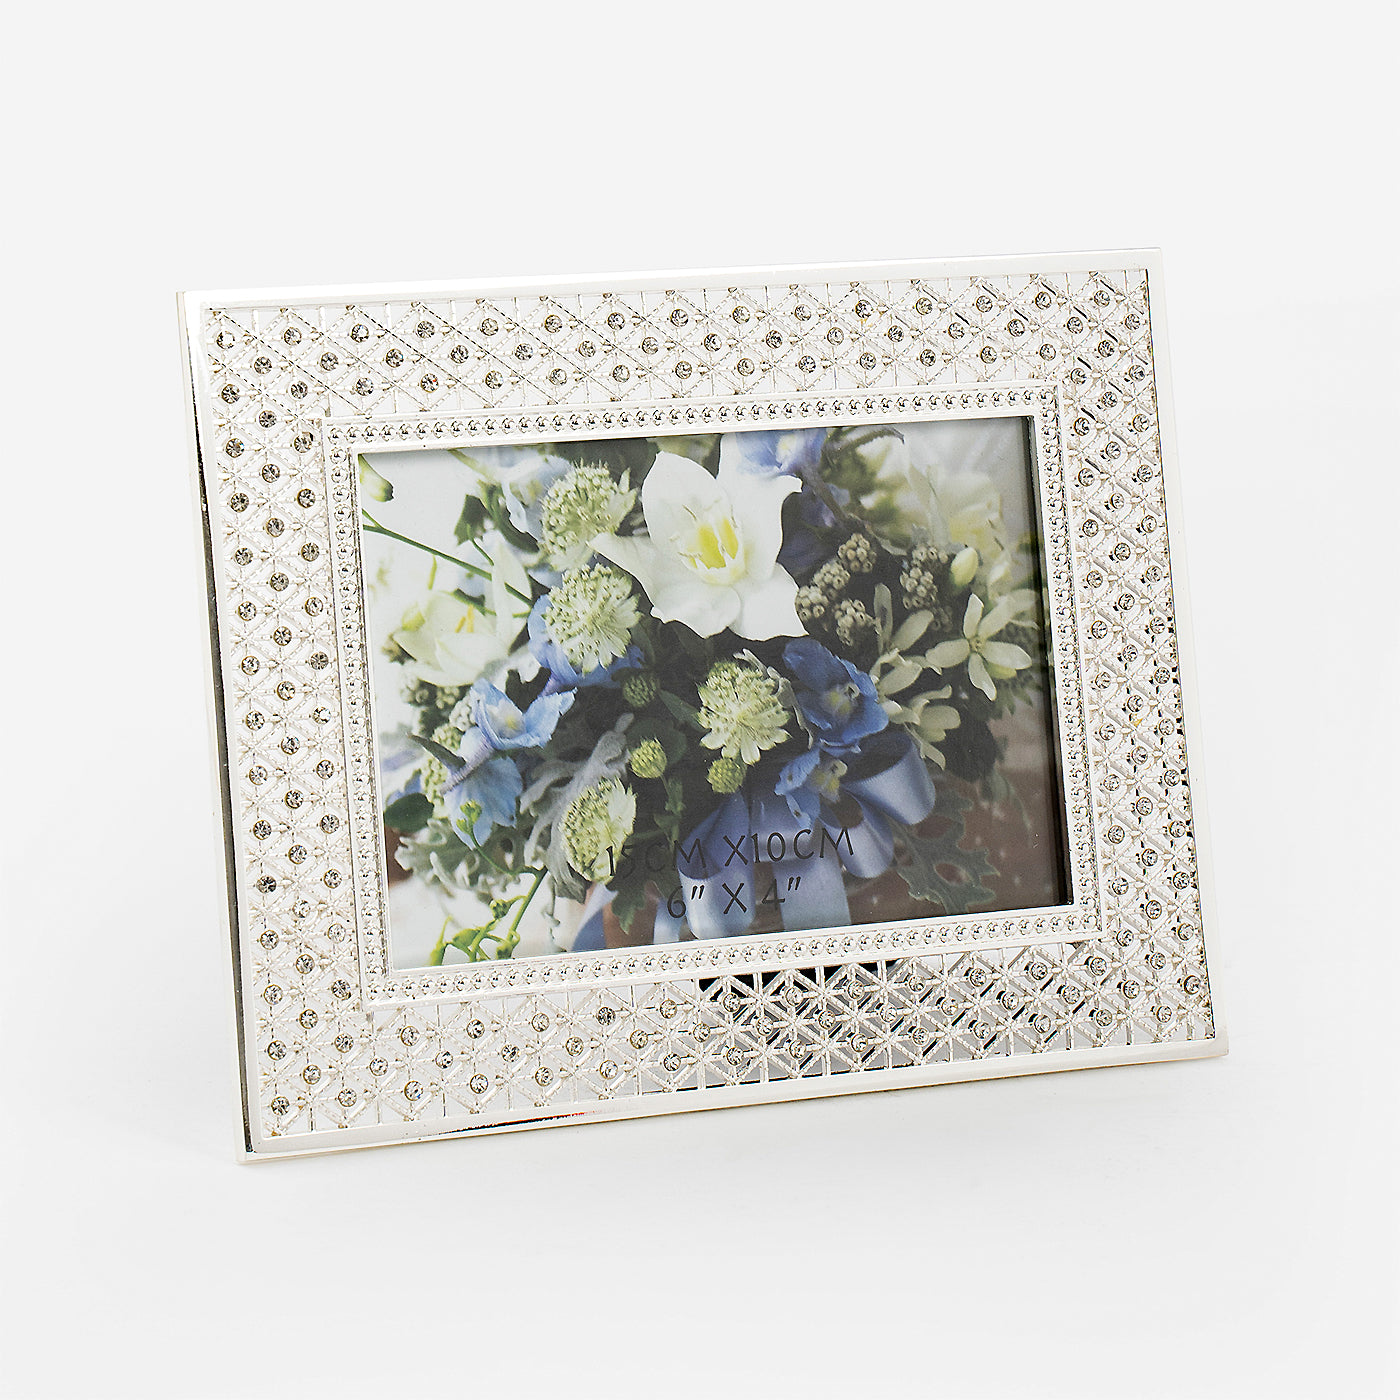 Crystal Studded Silver Plated Photo Frame